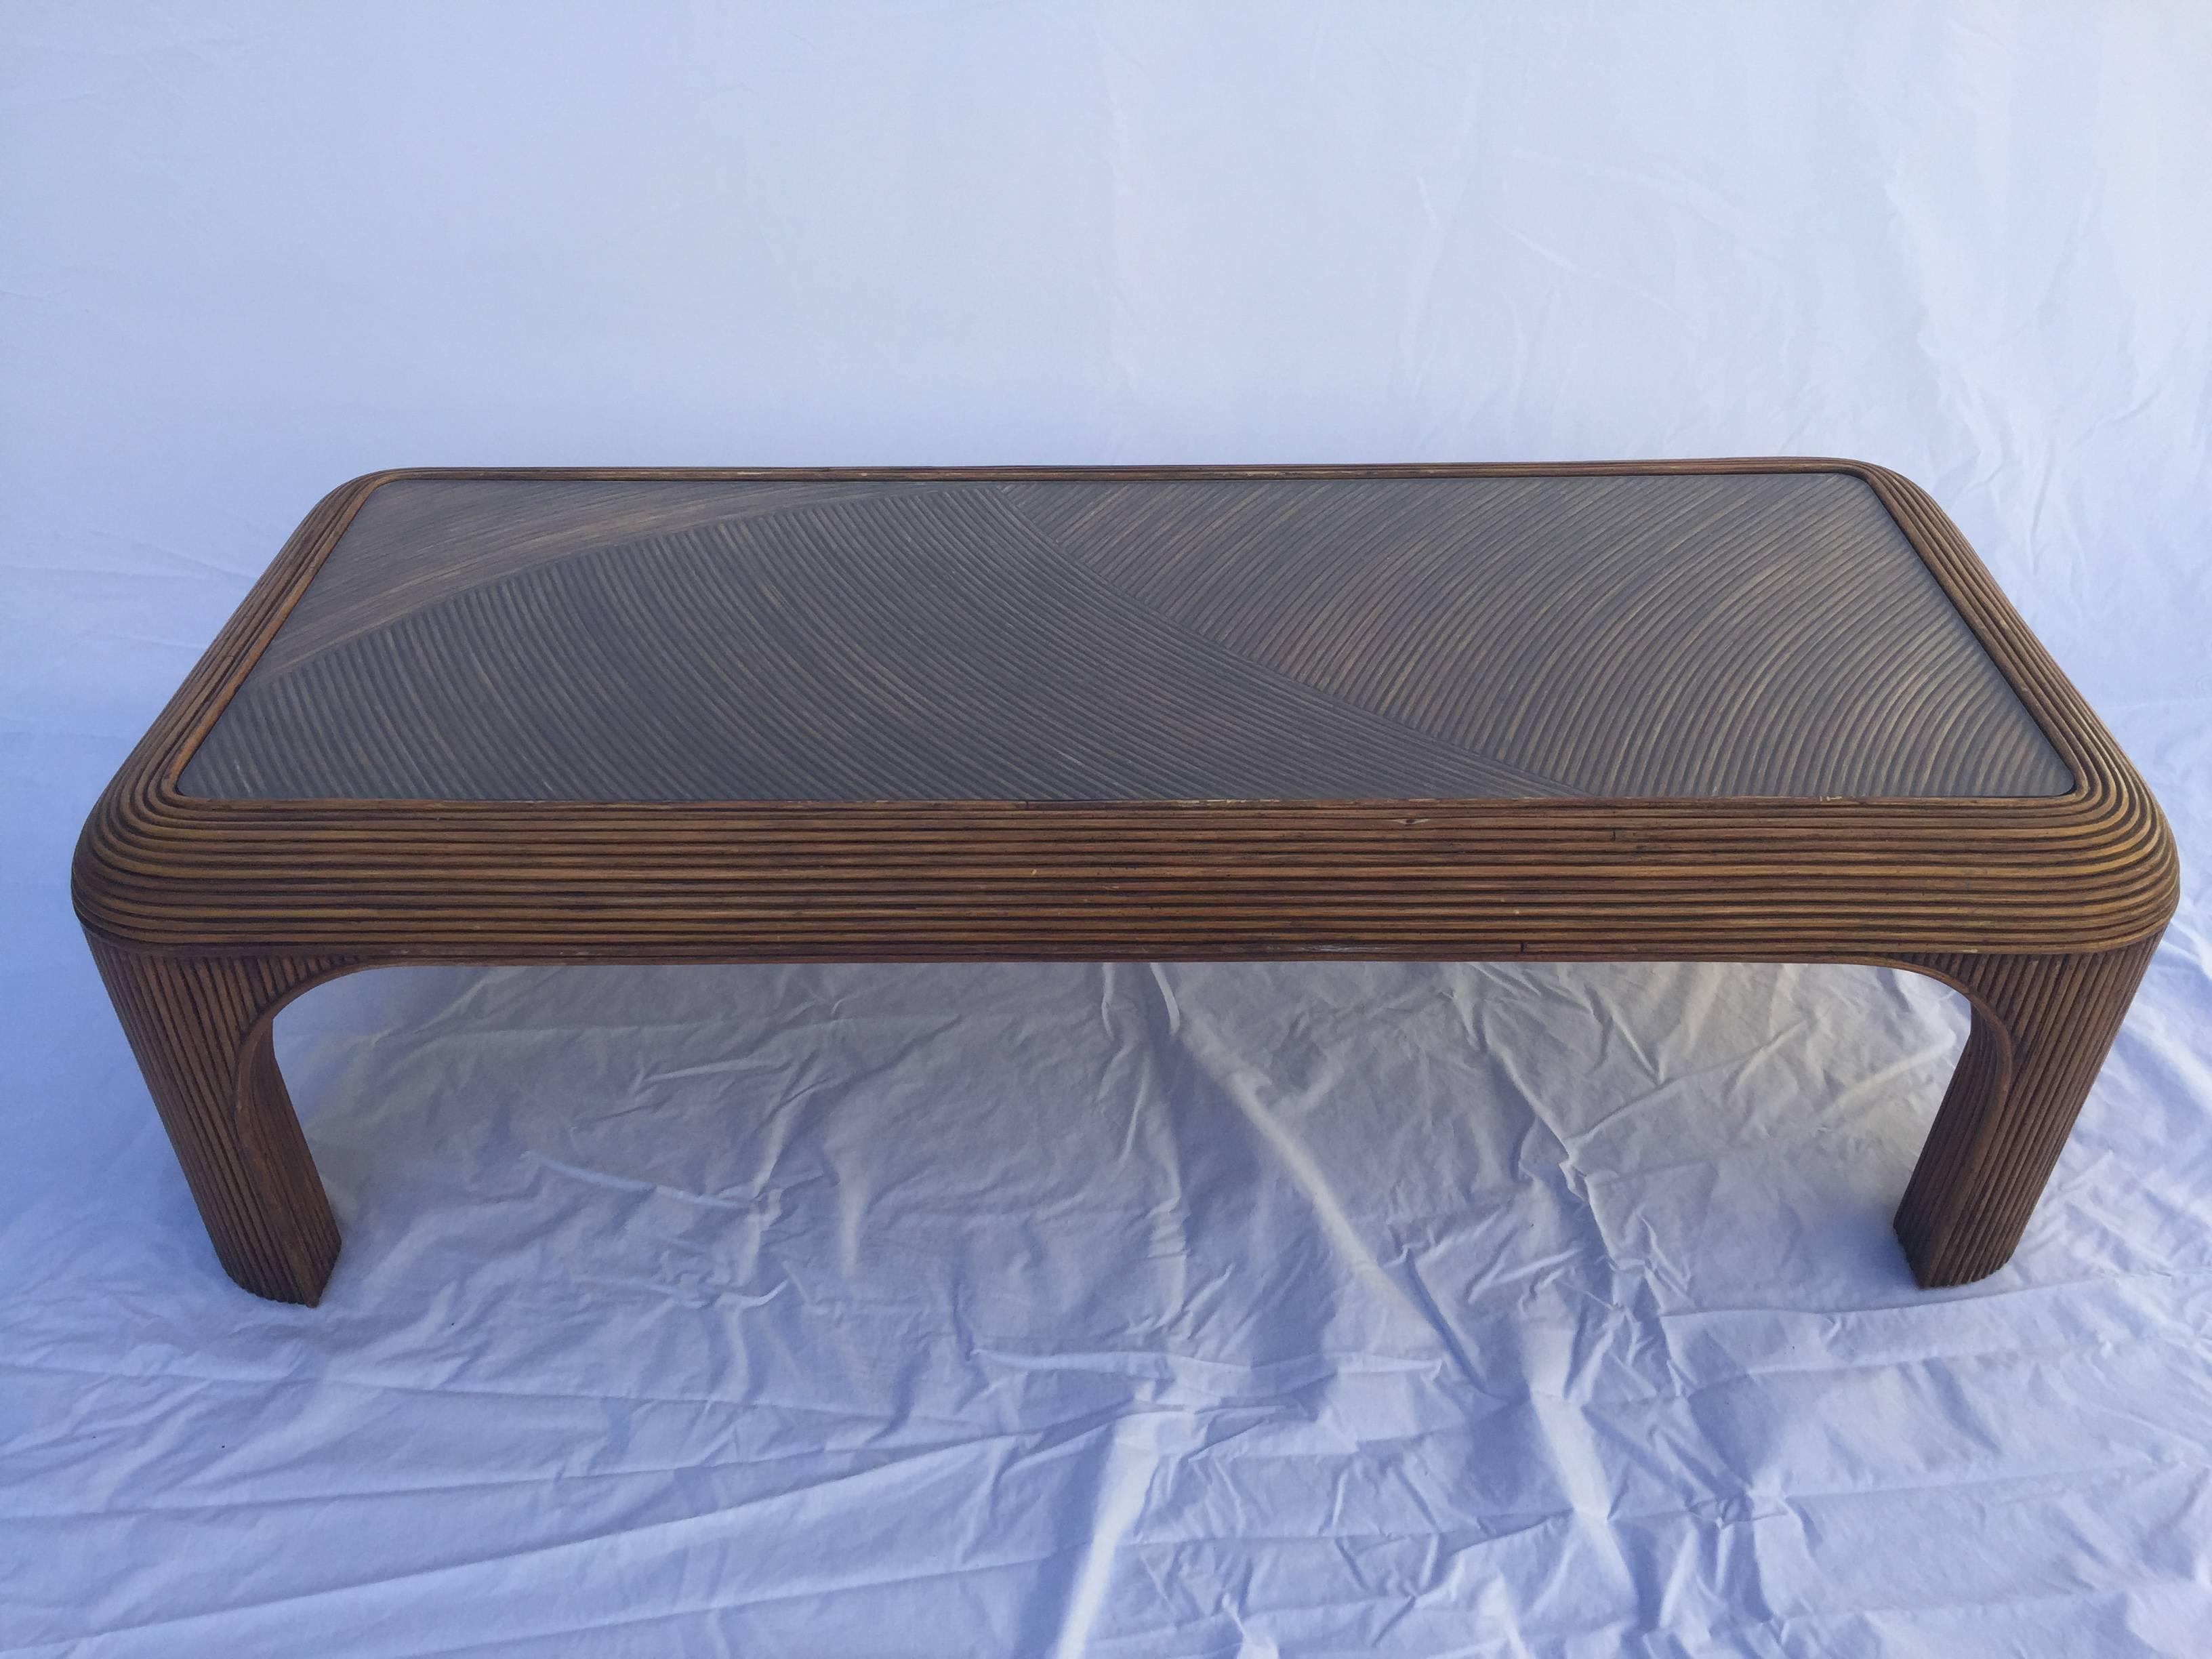 This vintage coffee table is solidly constructed with row upon row of gorgeous split reed rattan bamboo. With rounded corners and a fantastically designed top, this coffee table is absolutely stunning. Dahling.  Oh, and if you're looking for the